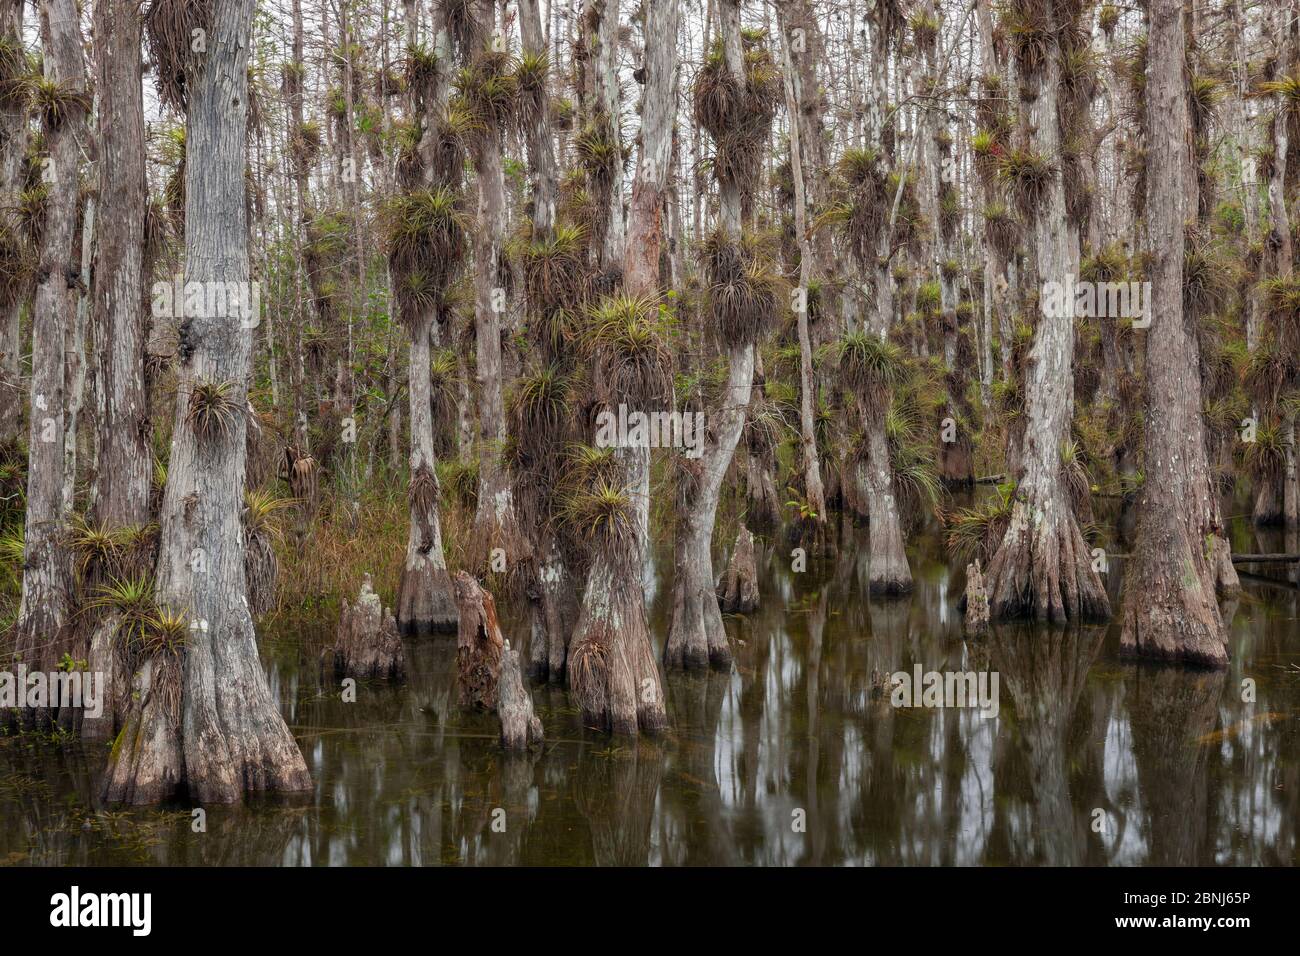 Bald cypress (Taxodium distichum) trees in swamp with lots of epiphytes growing on bark, Everglades National Park, Florida, USA, January 2015. Stock Photo